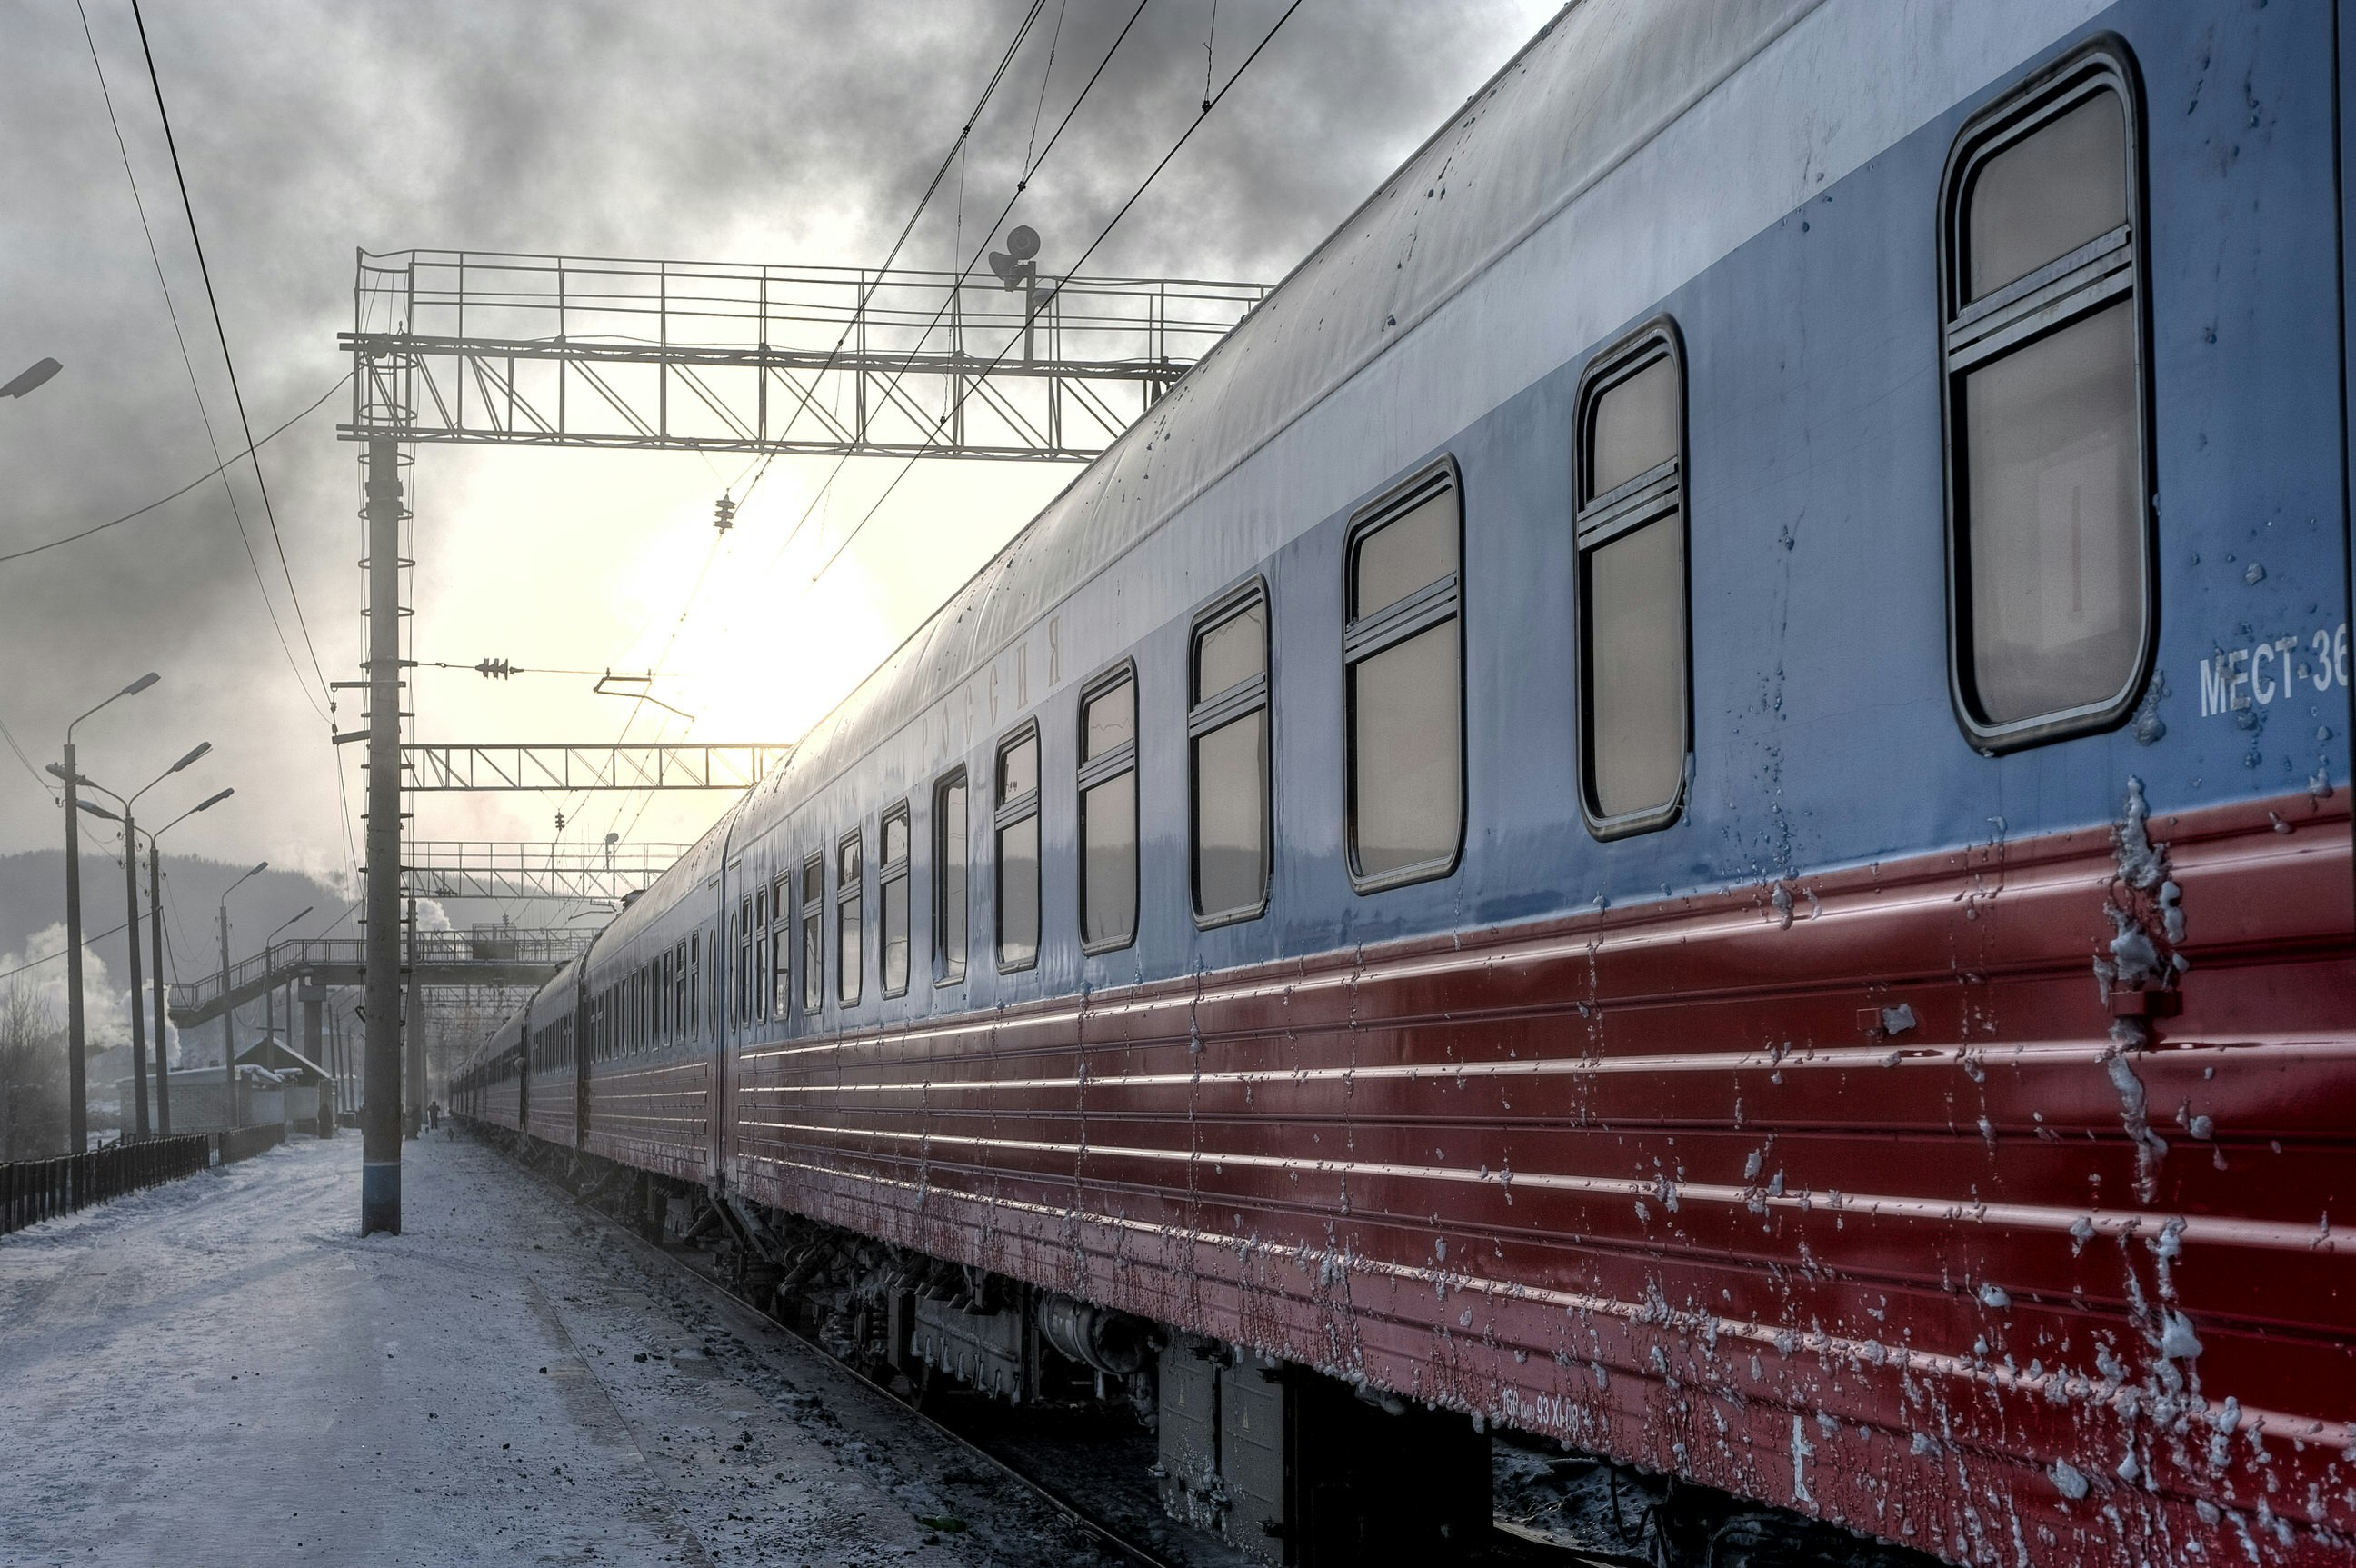 Riding the Trans Siberian railway again after 10 years - Lonely Planet